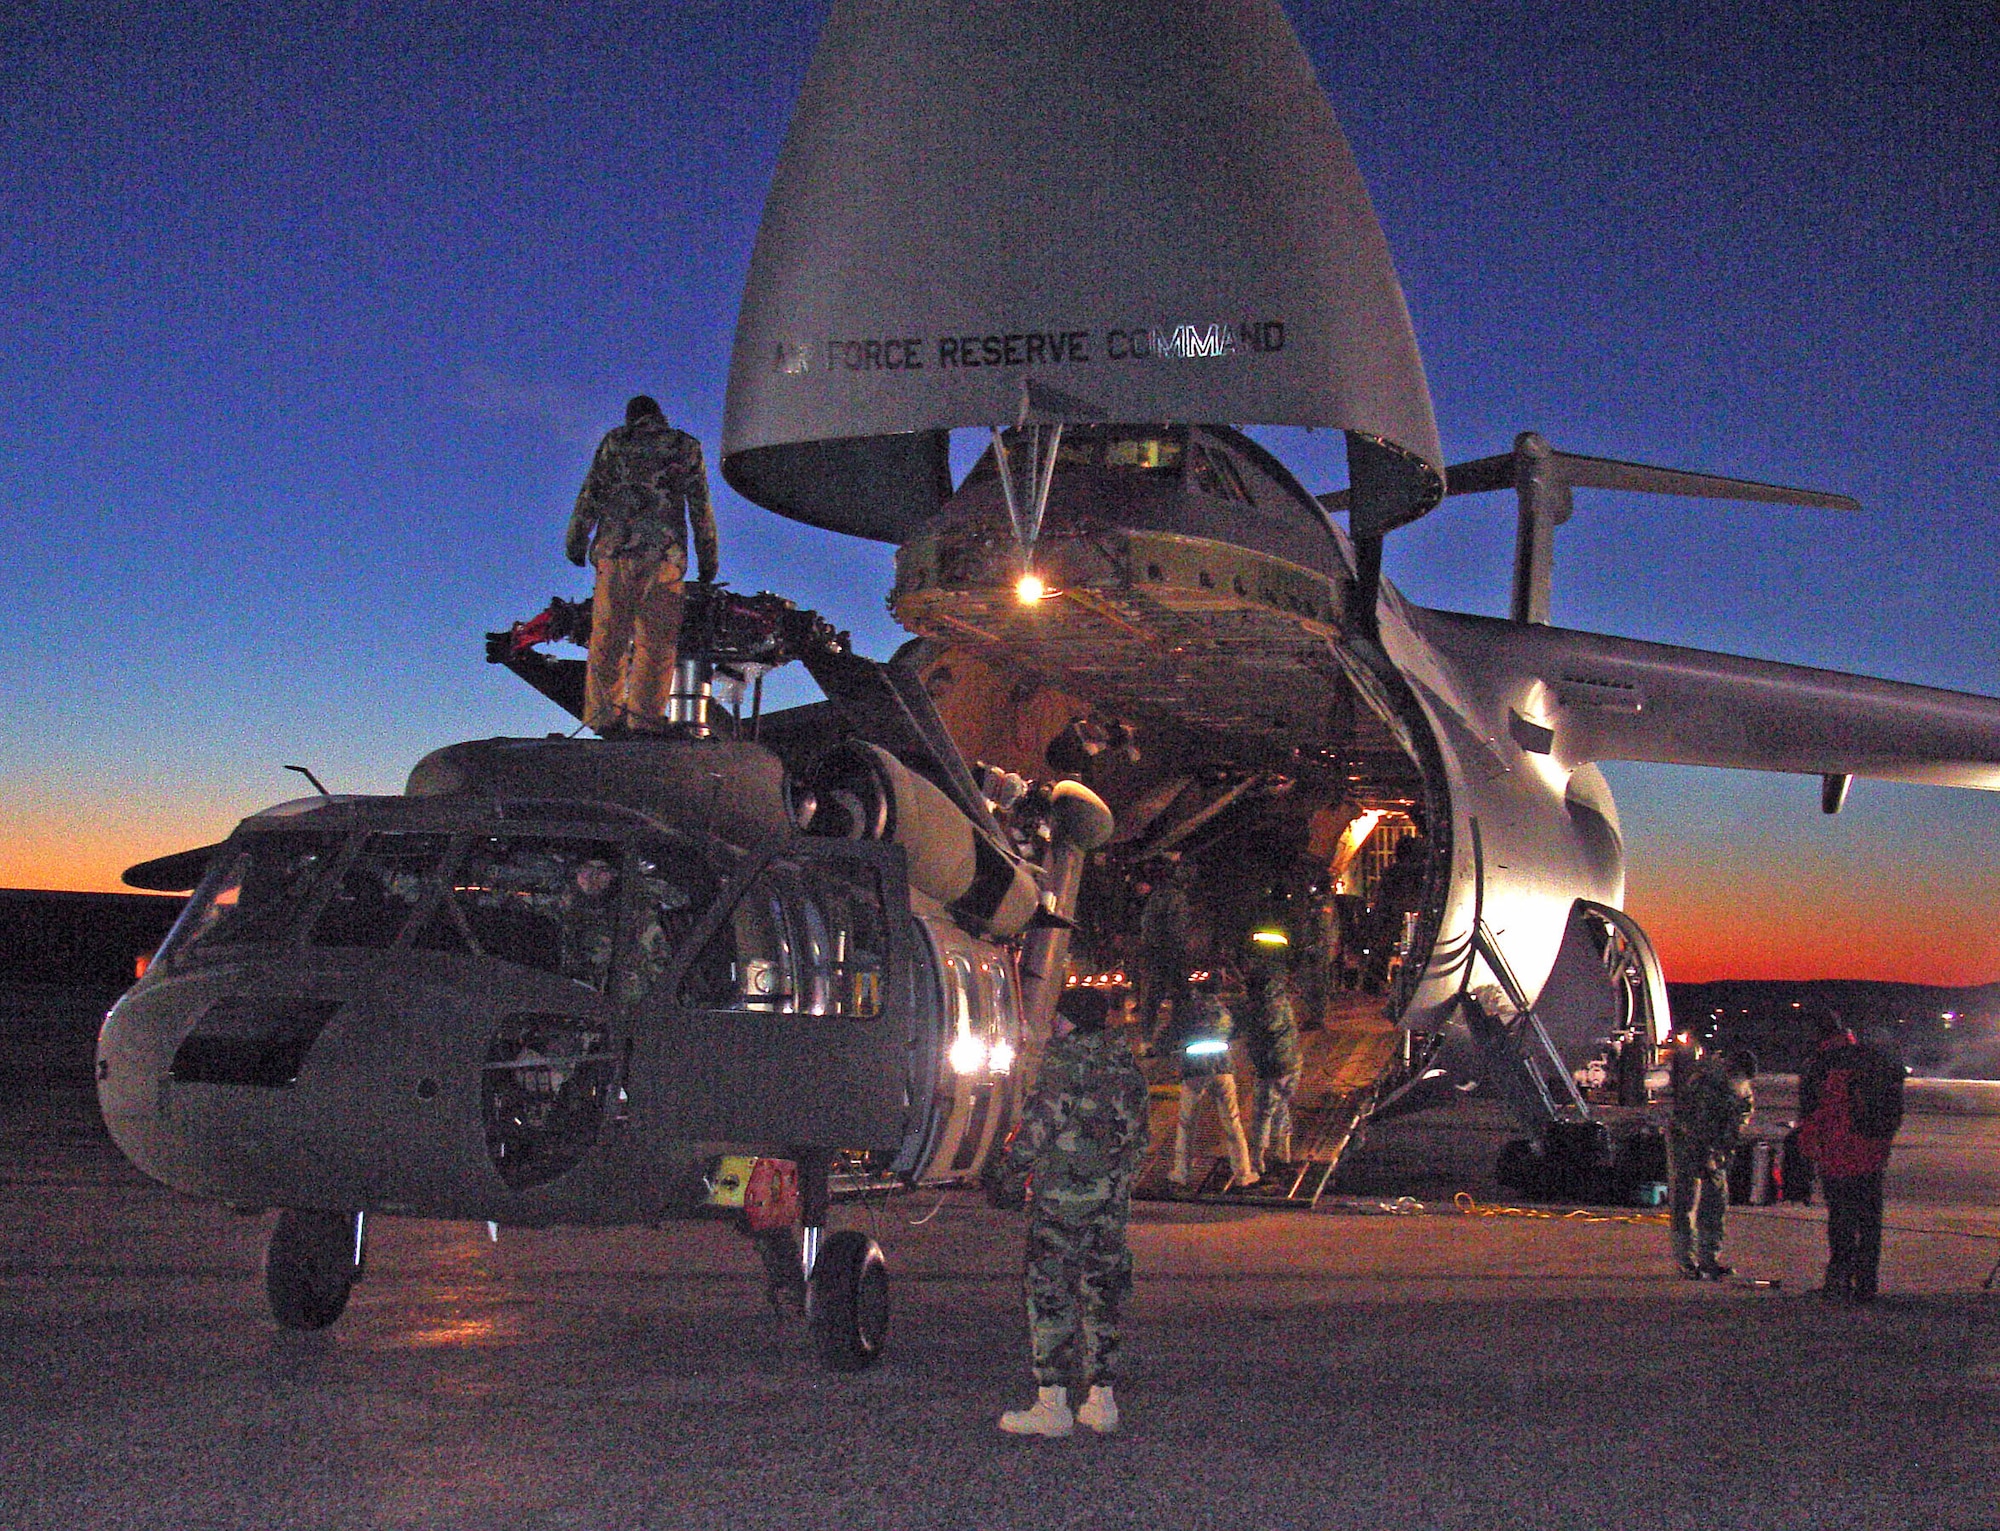 Soldiers and Airmen load three South Dakota Army National Guard UH-60 Black Hawk helicopters aboard a C-5A Galaxy aircraft Tuesday, Jan. 30, at Ellsworth Air Force Base in preparation for support to a humanitarian assistance exercise in Nicaragua.

This joint operation between the U.S. Air Force and the South Dakota National Guard is in support of a humanitarian assistance exercises in Nicaragua known as New Horizons, which involves construction of schools, clinics, and water wells in countries throughout the U.S. Southern Command region. These humanitarian assistance exercises, which last several months each, provide much needed services and infrastructure, while providing critical training for deployed U.S. military forces. These exercises generally take place in rural, underprivileged areas.

The helicopters loaded belong to Company C, 1st Battalion, 189th Aviation, which is a South Dakota Army National Guard air-ambulance unit based in Rapid City. Approximately 125 Soldiers from the National Guard unit will be providing general aviation and casualty evacuation from Feb. 4 to May 6 in support of the exercise in Nicaragua. (South Dakota Army National Guard photo/Maj. Orson Ward.) 